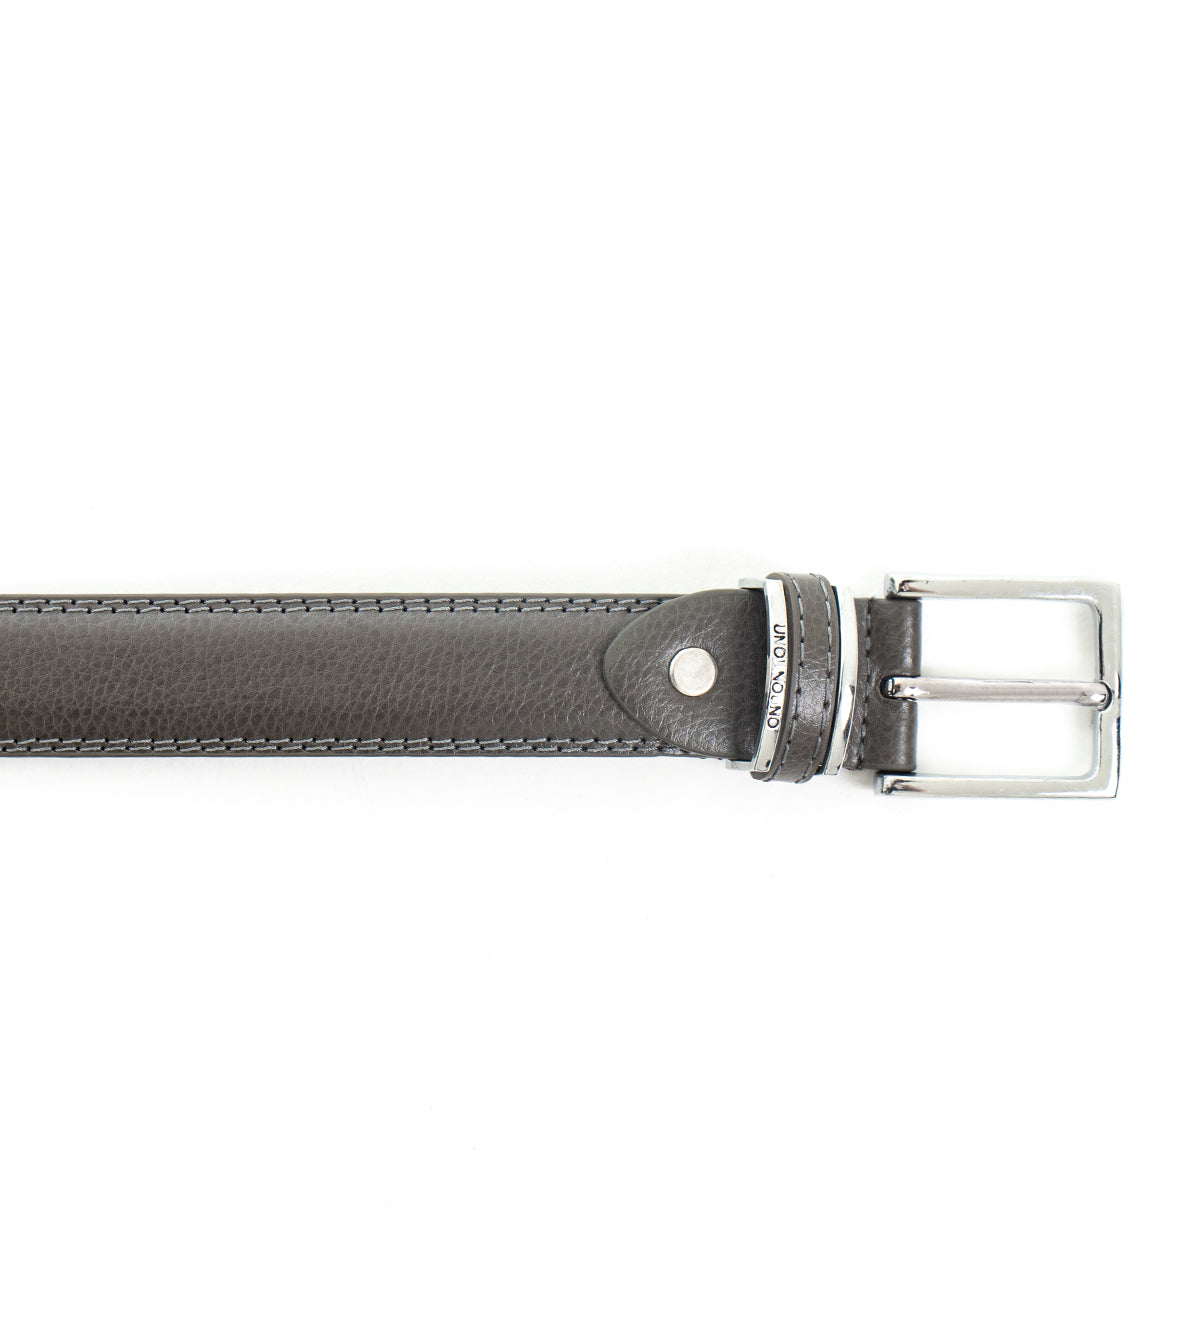 Wide Men's Belt with Adjustable Metal Buckle Gray Textured Faux Leather GIOSAL-A2080A